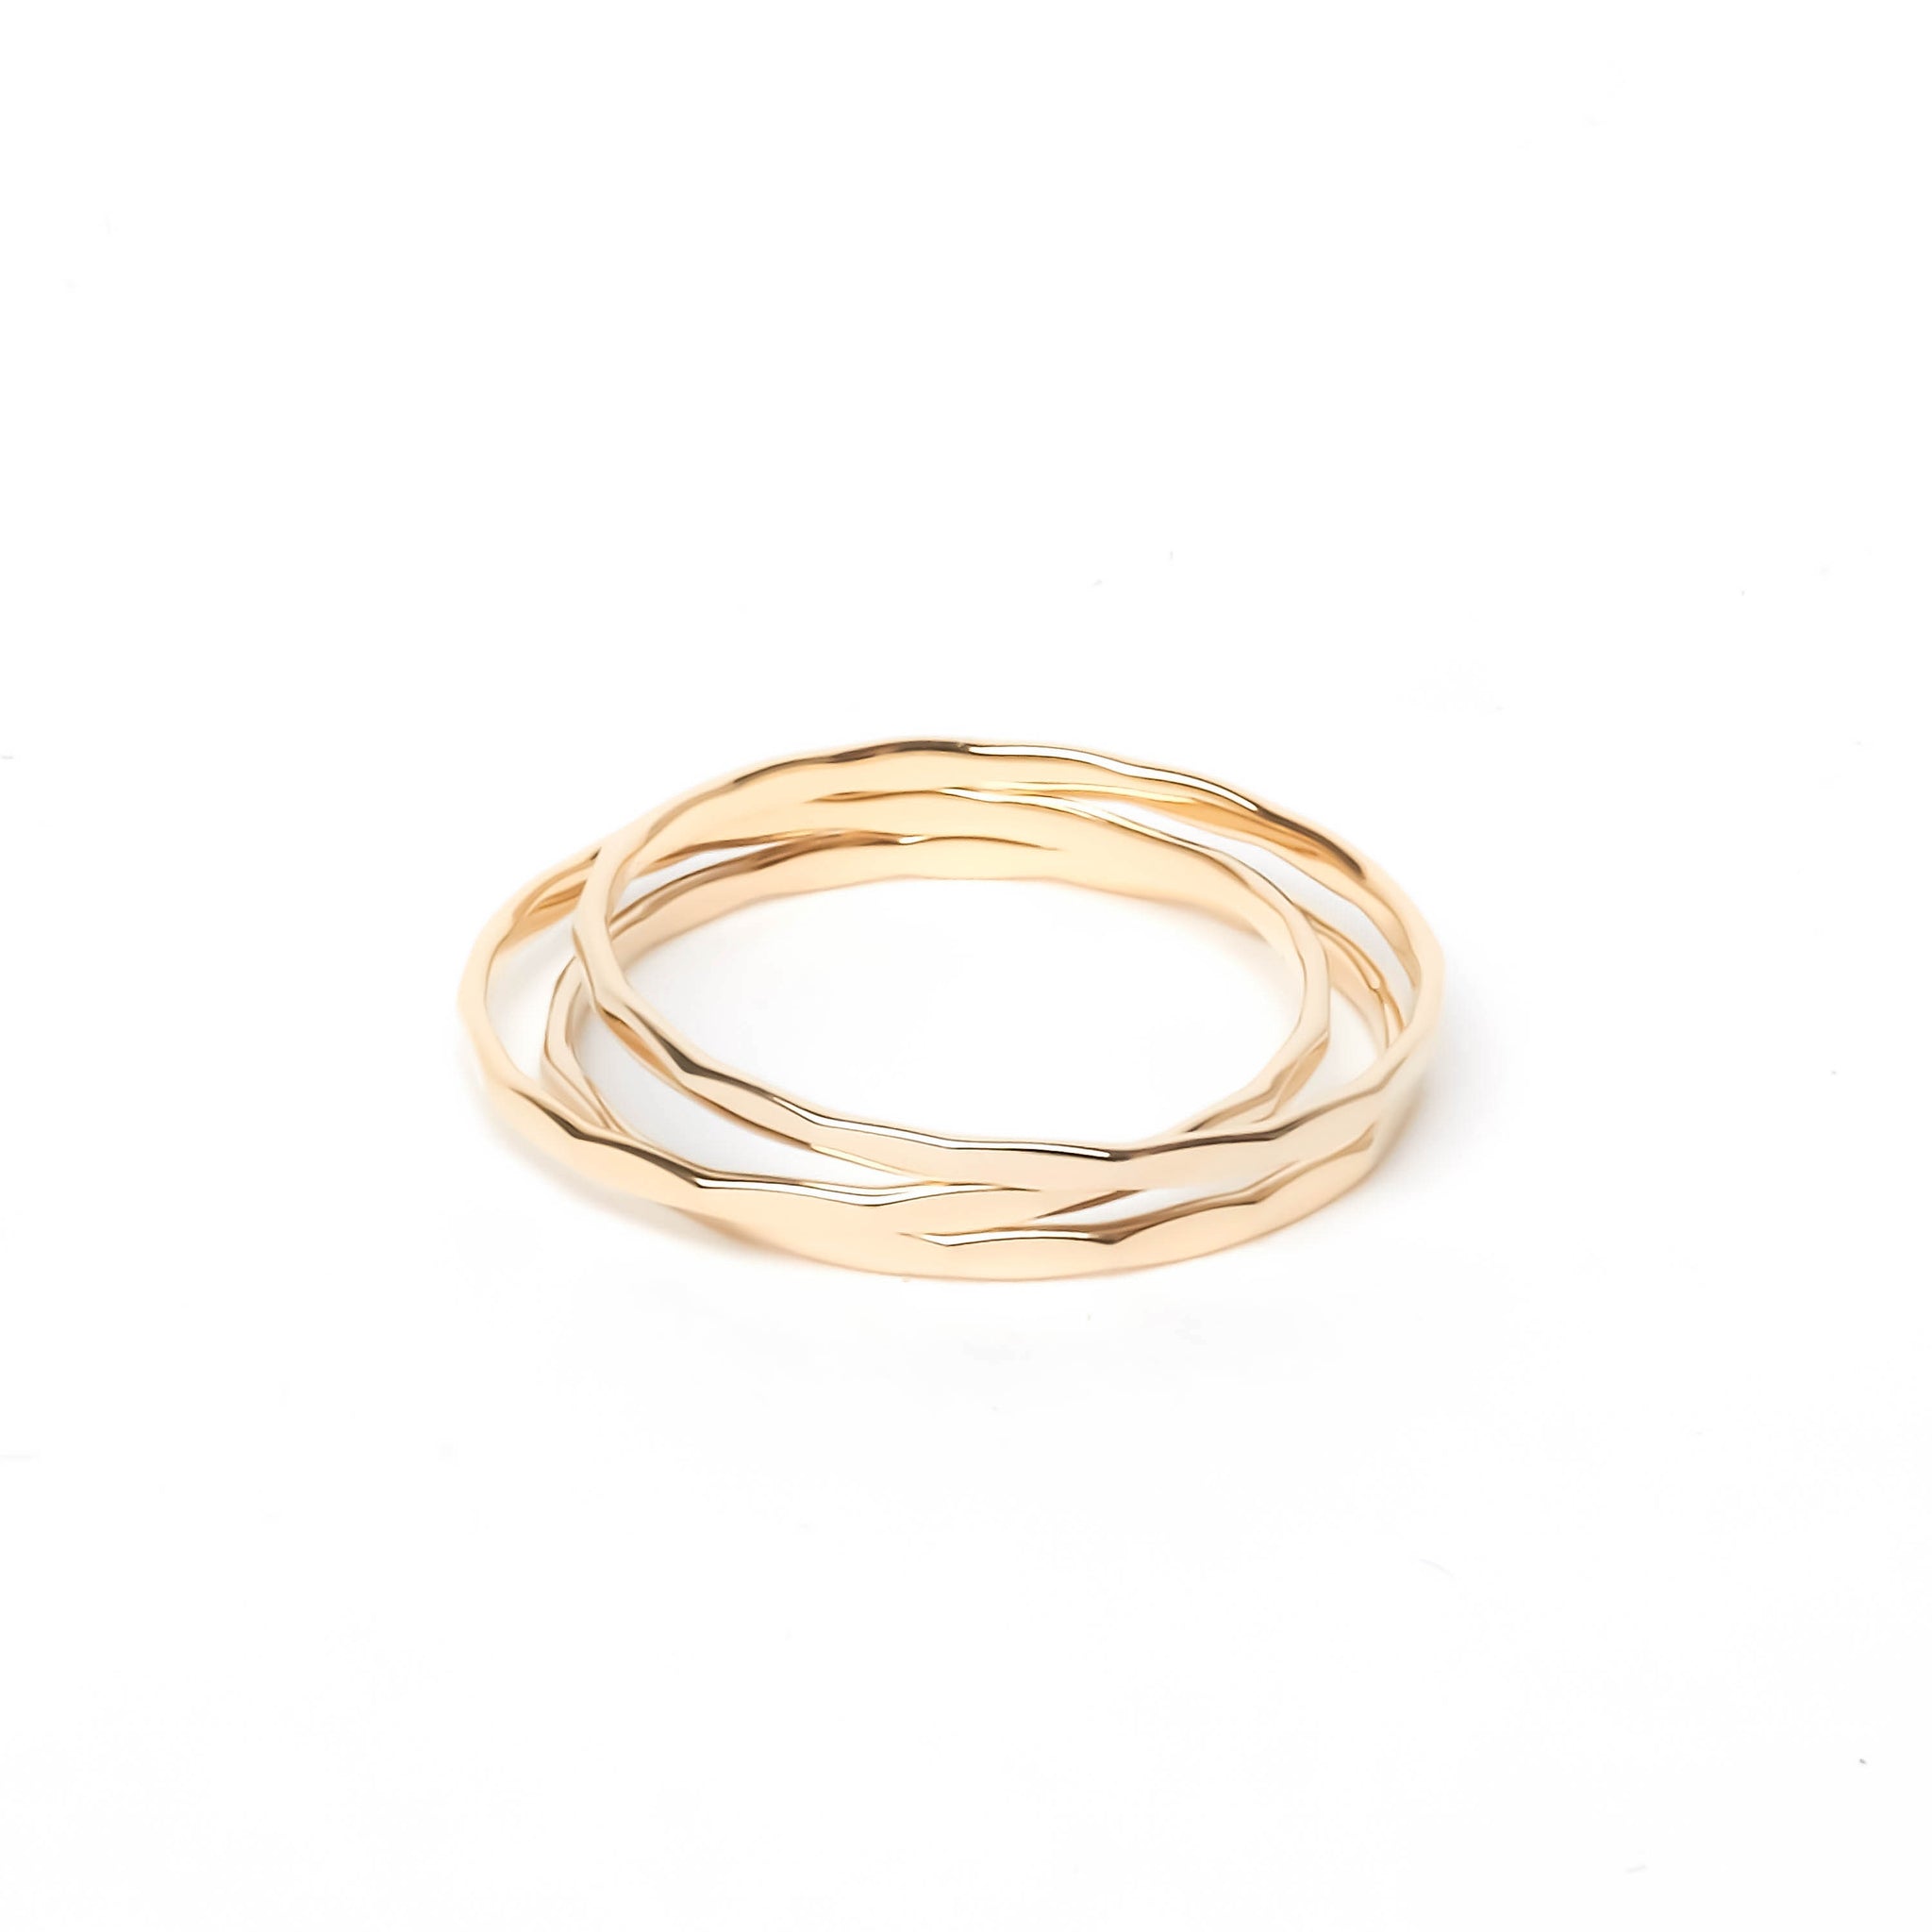 Three gold flat ring with hammered groove decorations stacked